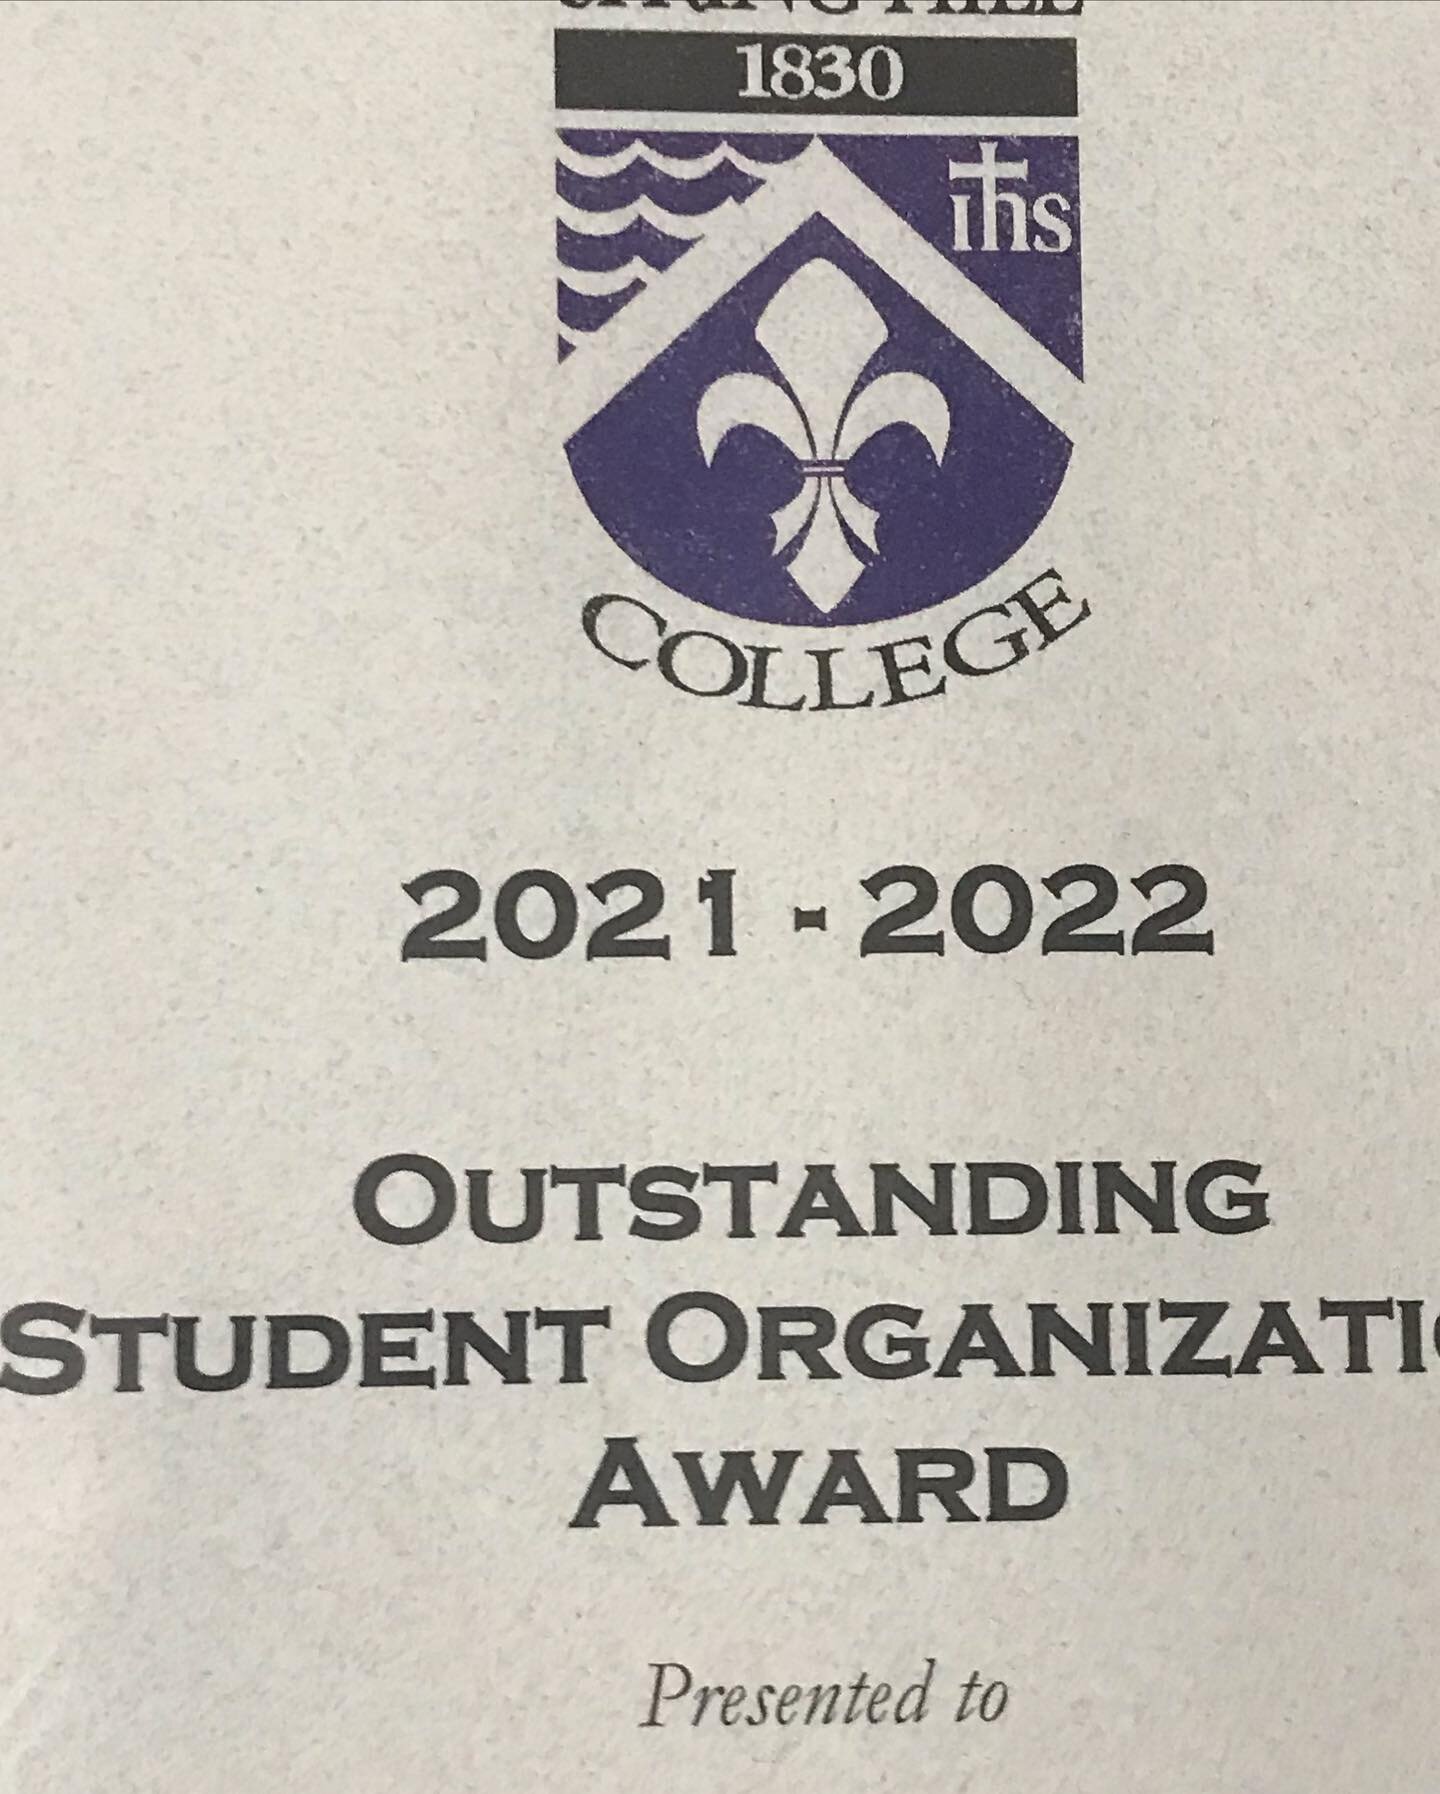 Badgers, THANK YOU for voting for The Motley for Outstanding Student Organization of the Year, and for voting Professor Brian Druckenmiller for Faculty Advisor of the Year 💜💜💜 The Motley is infinitely grateful for all of your support.